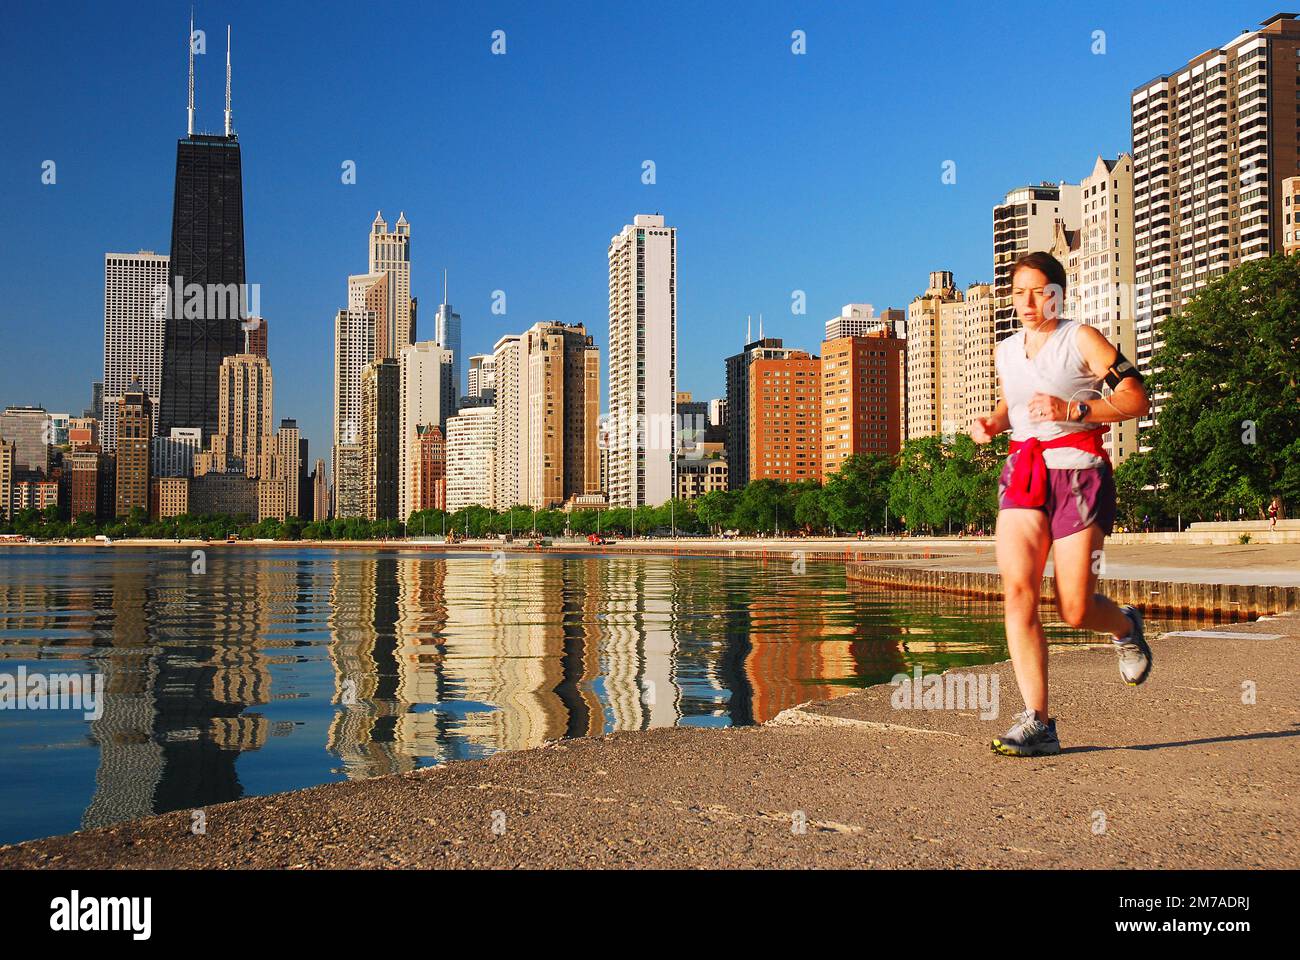 A young woman jogs along the lakefront with the Chicago skyline rising behind her Stock Photo